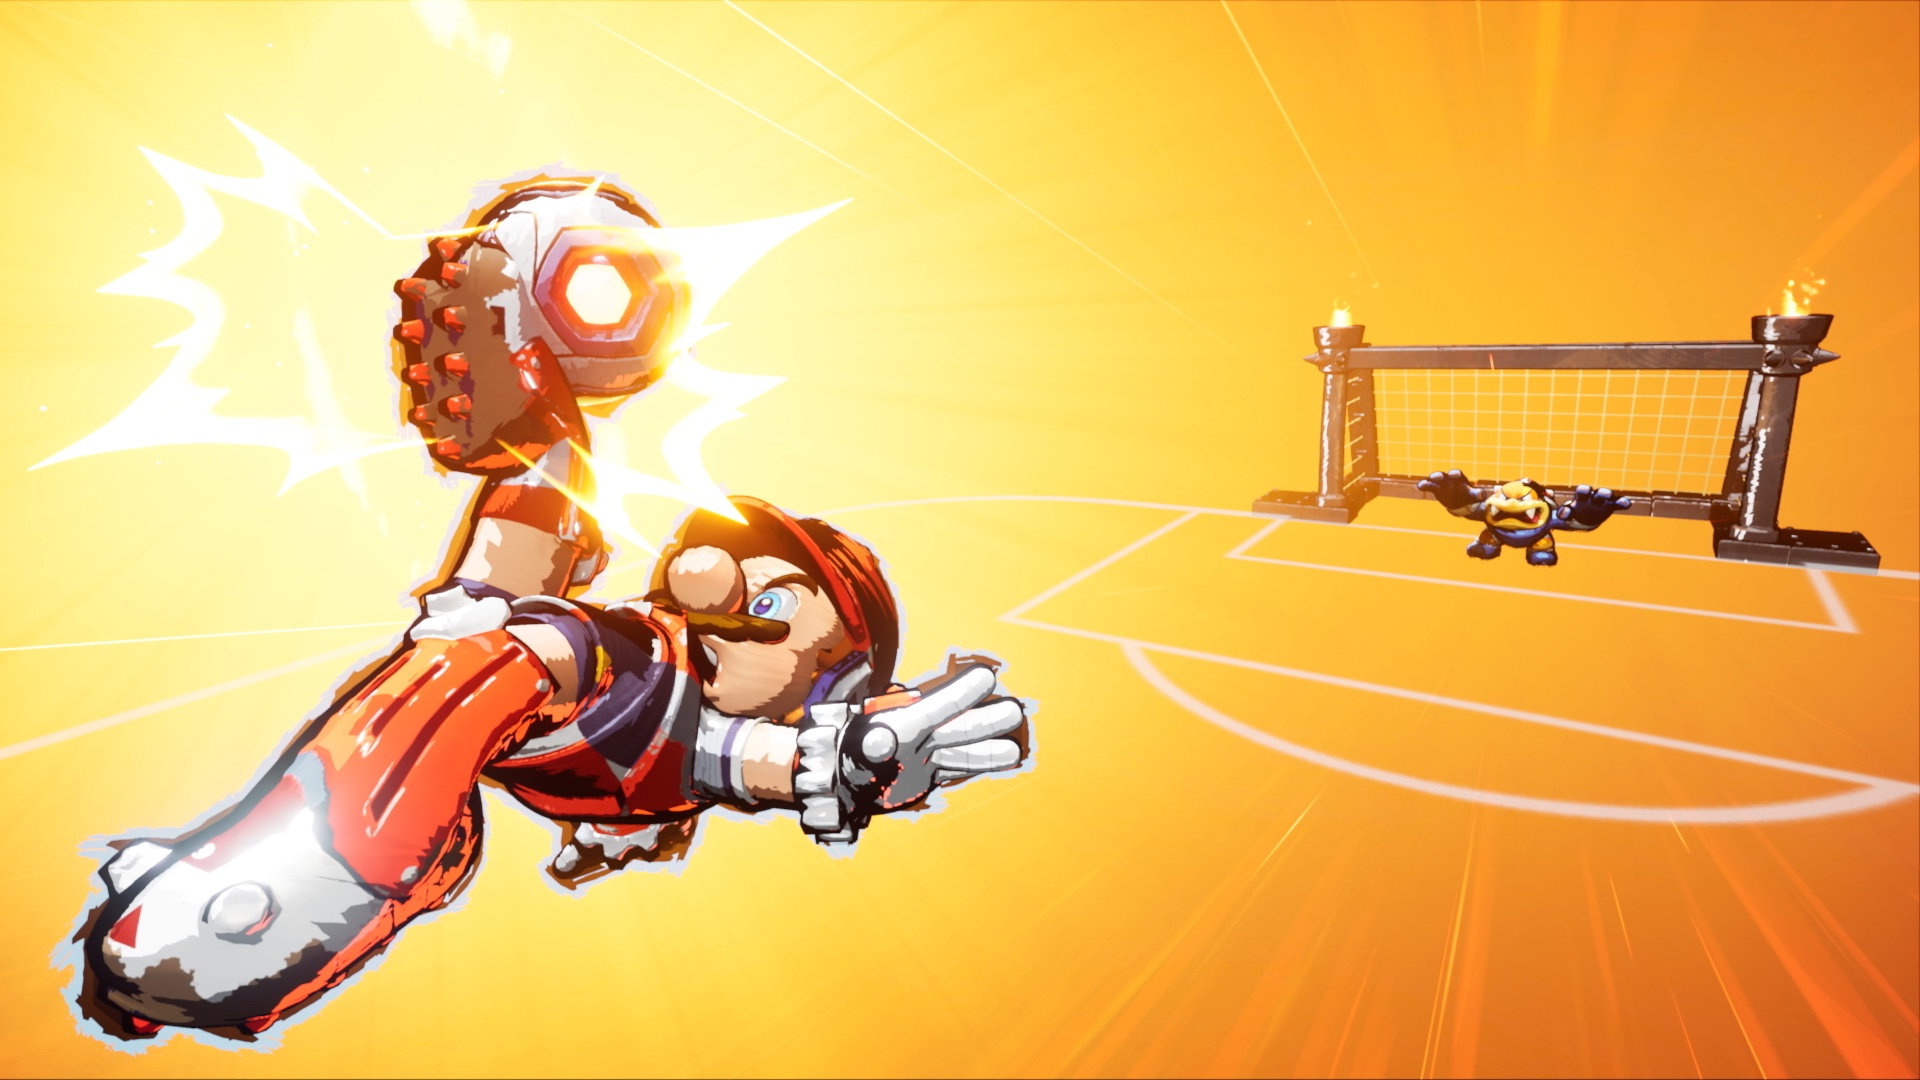 Mario uses his Hyper Strike kick to smack a soccer ball at Boom Boom in a screenshot from Mario Strikers: Battle League